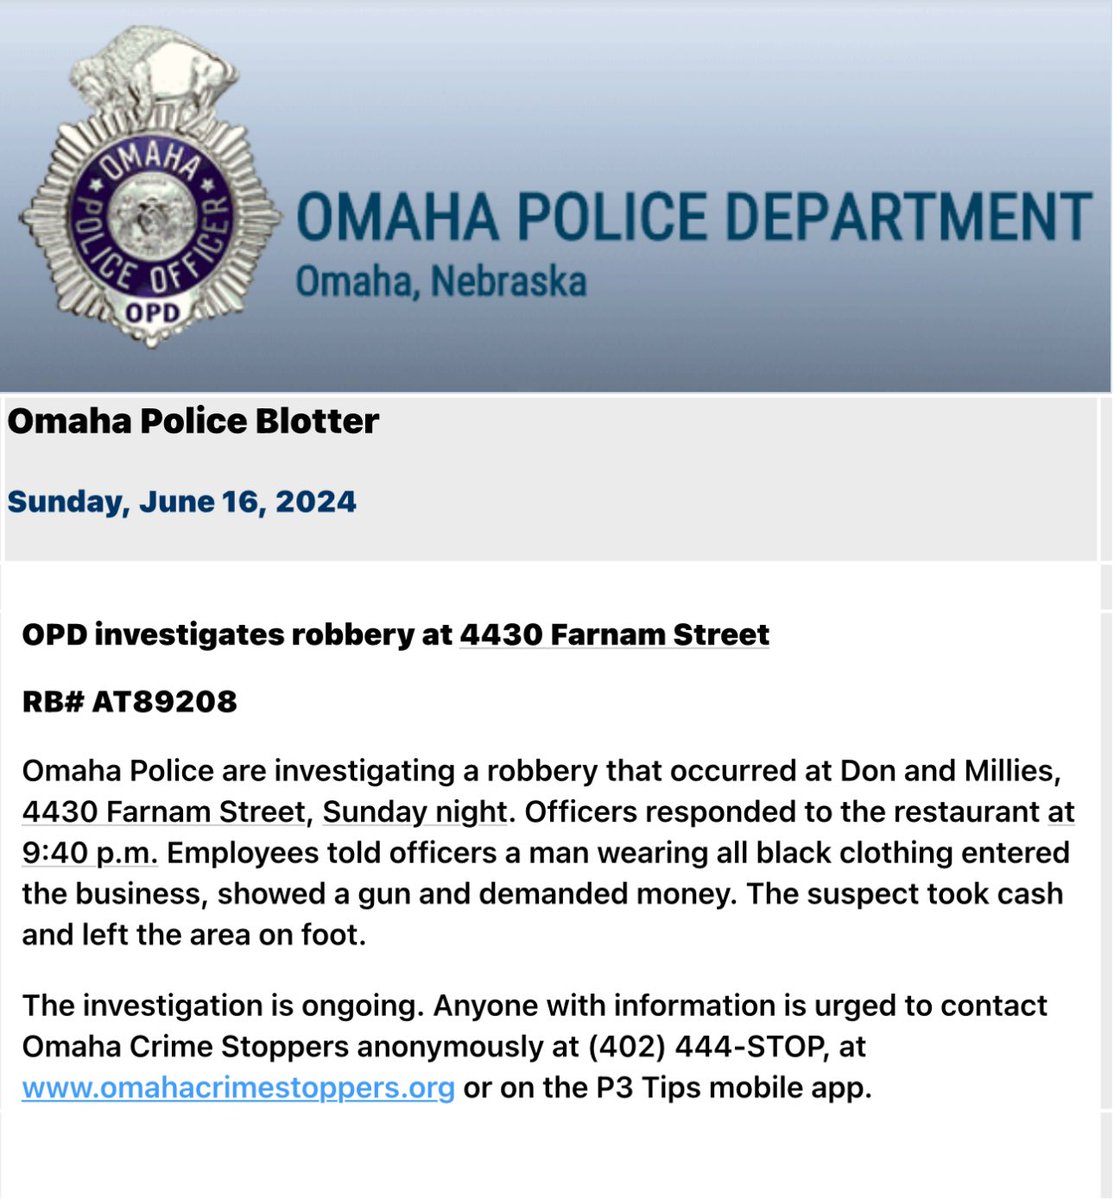 Omaha Police are investigating a robbery at Don and Millie's that occurred at 4340 Farnam Street. A man wearing all black displayed a gun and took money.